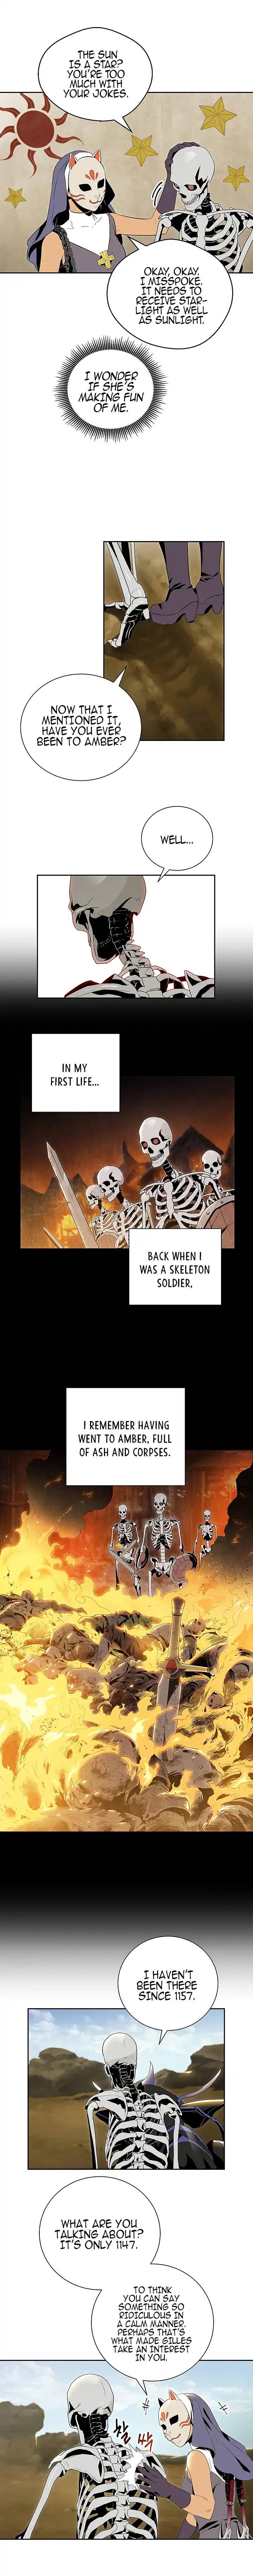 skeleton_soldier_couldnt_protect_the_dungeon_62_11